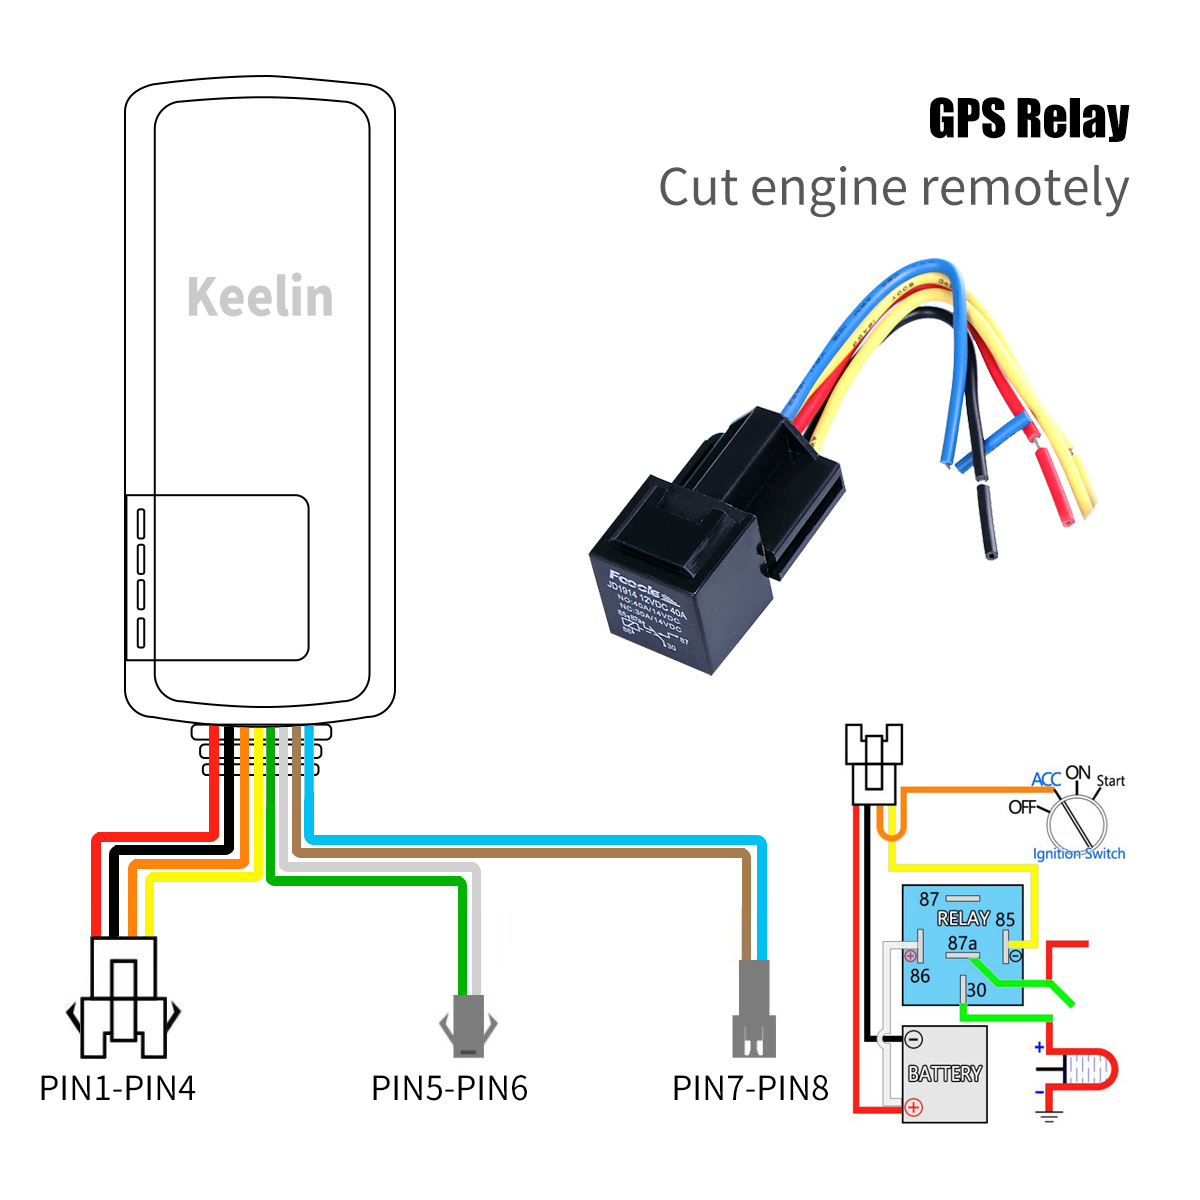 Relay with GPS Tracker to remotely Cut off Engine